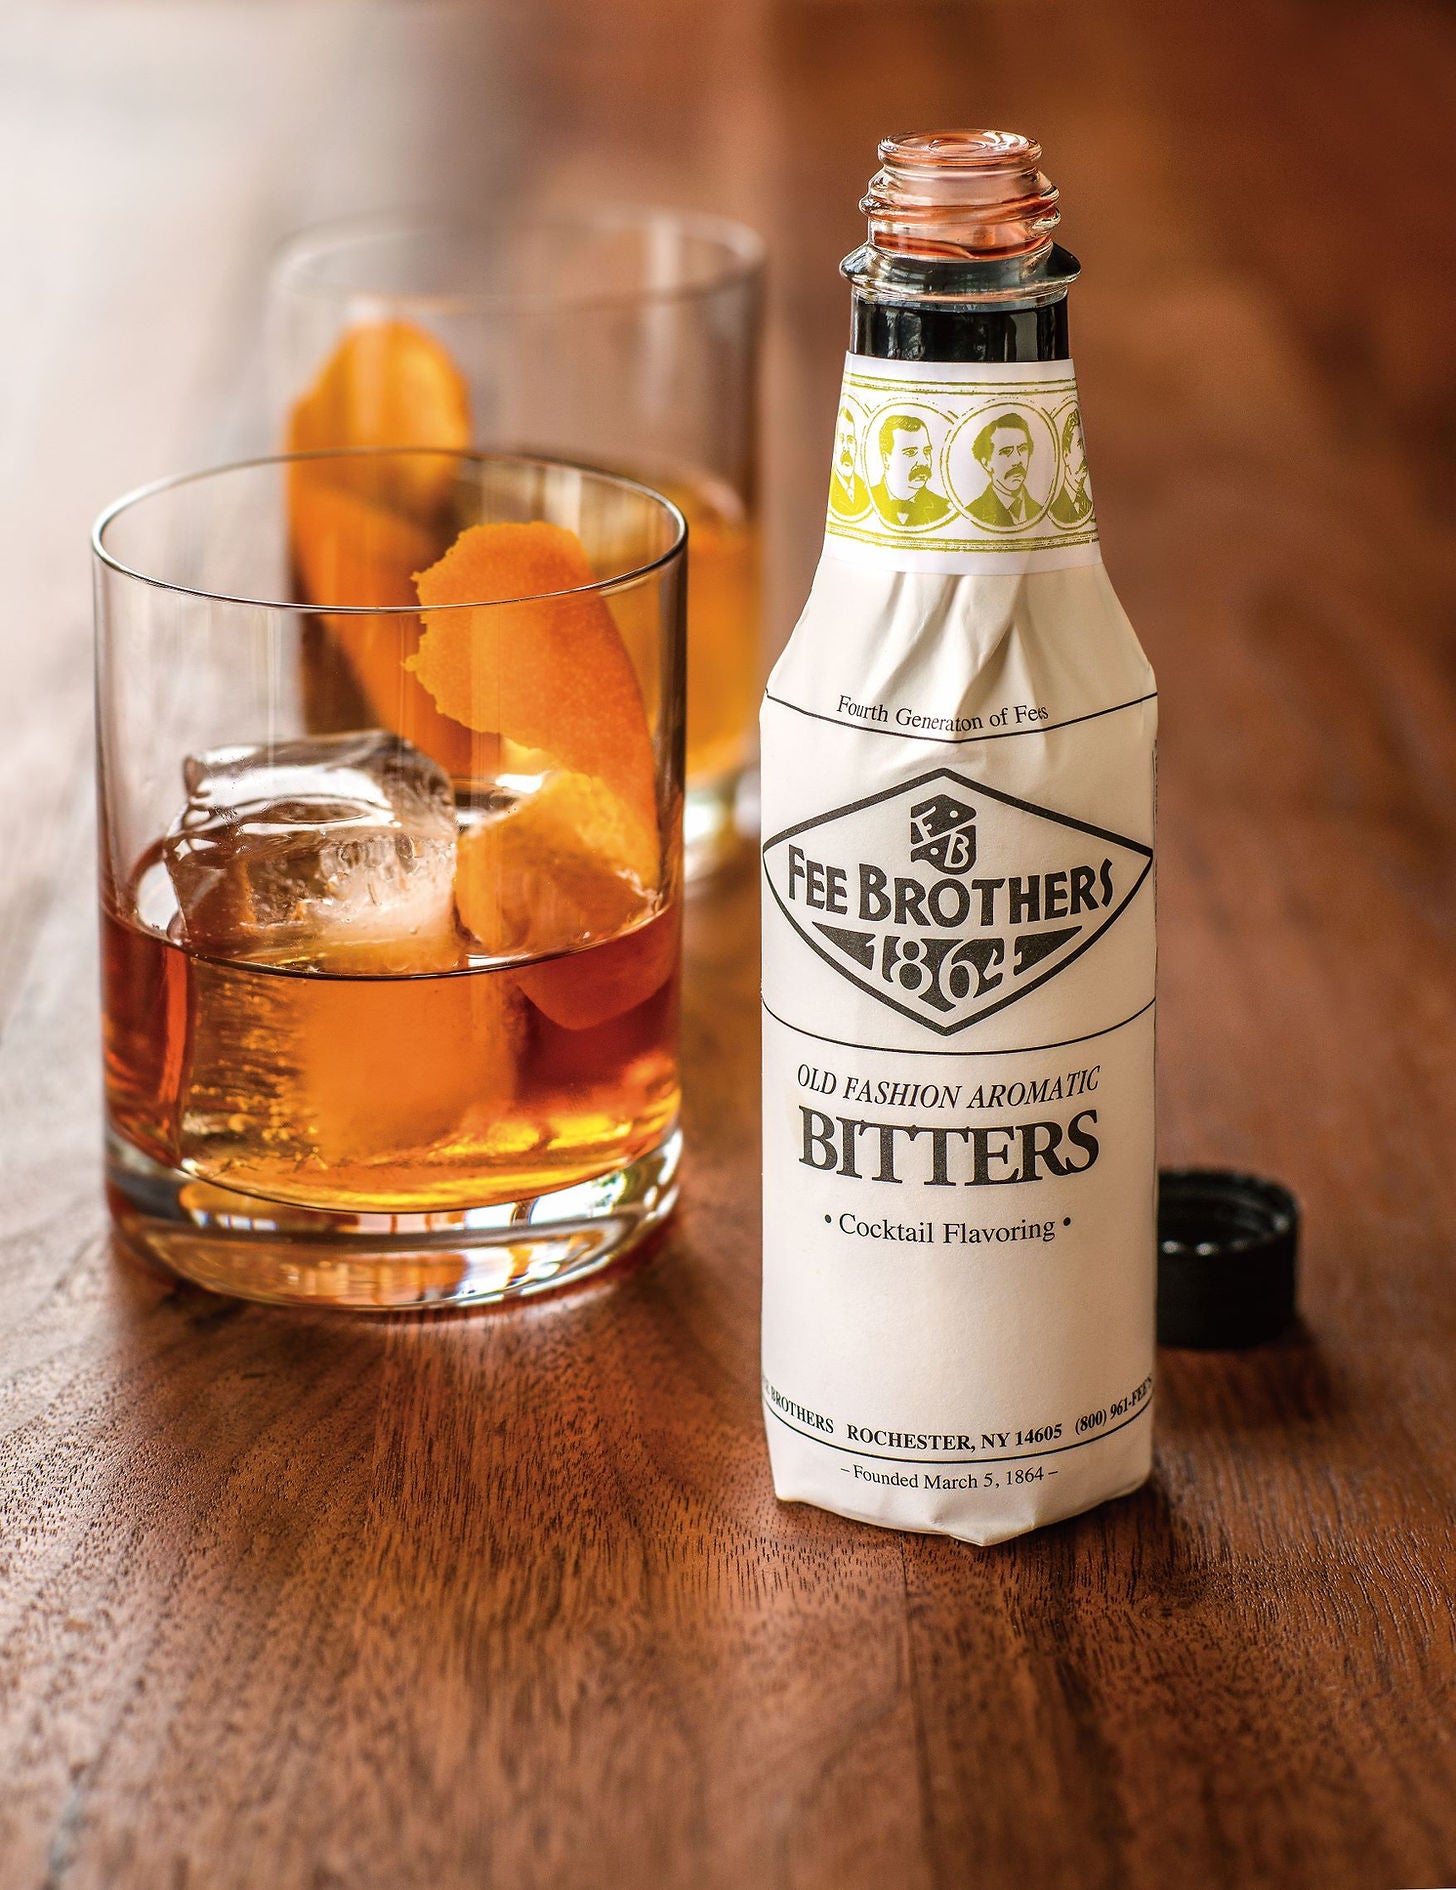 – BeverageWarehouse Aromatic Fashion Brothers Bitters Old Fee